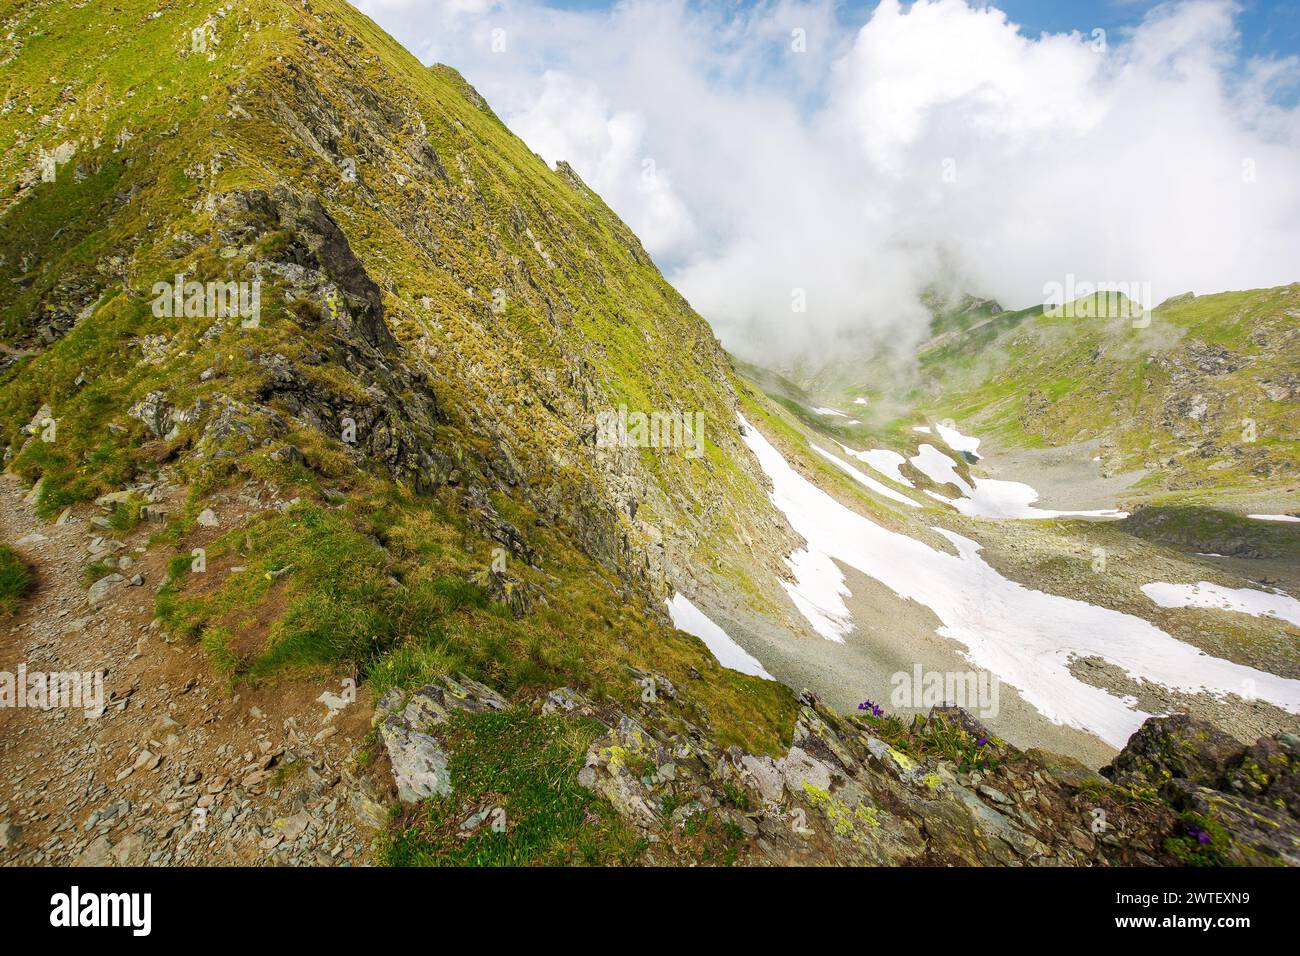 landscape of transylvania alps in summer. spots of snow among grass on the rocky hills of fagaras range beneath a sky with clouds. popular travel dest Stock Photo